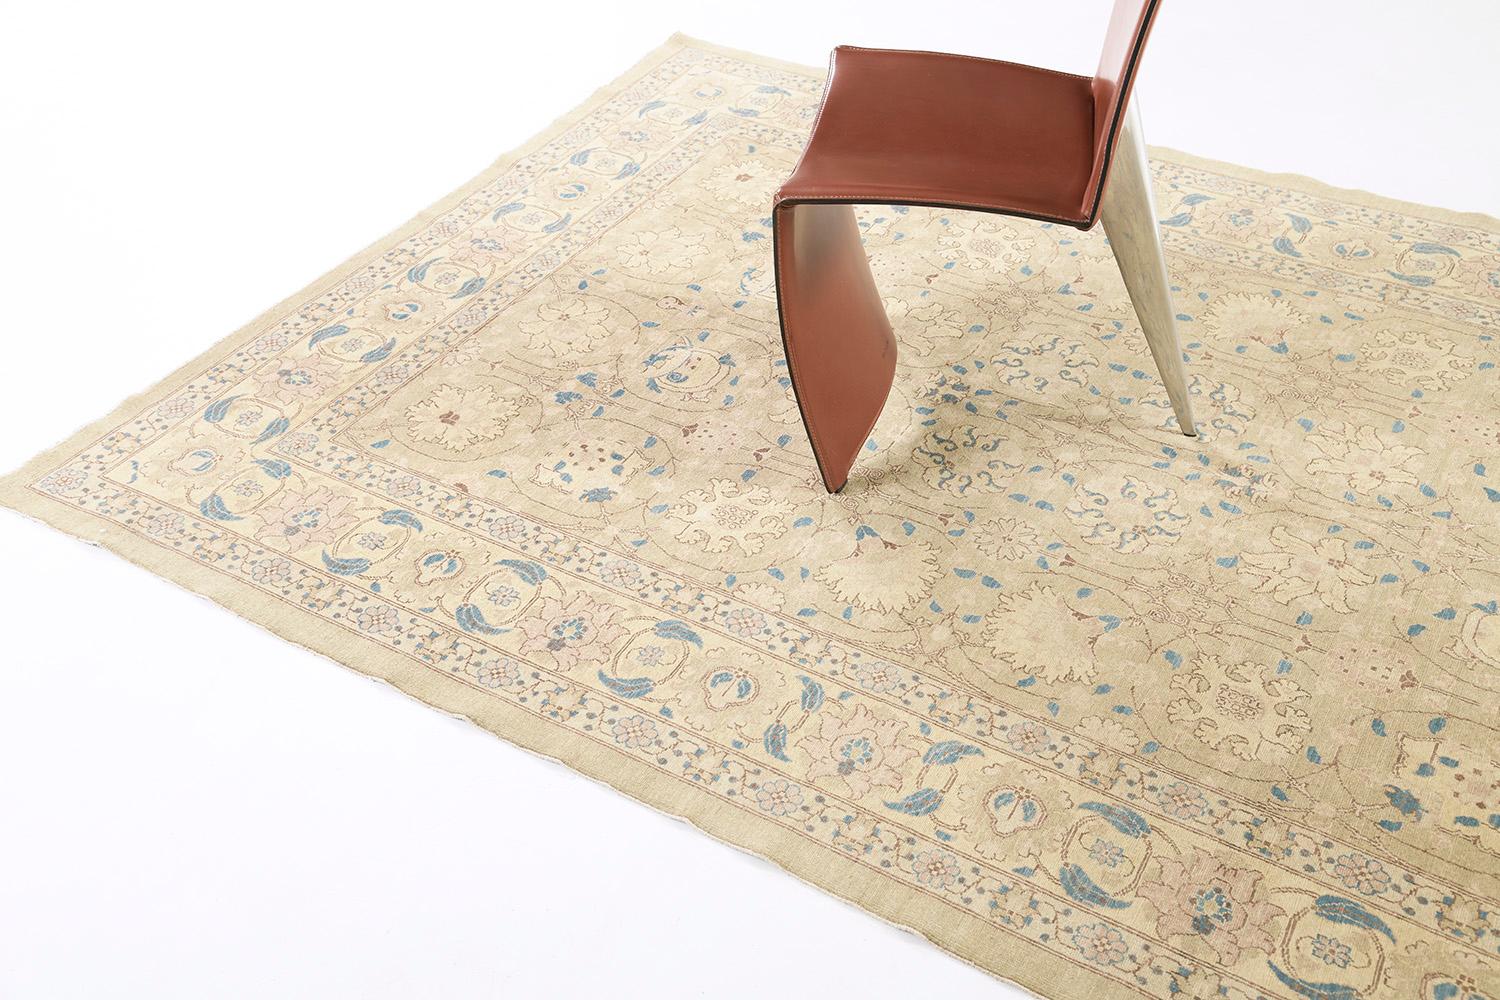 Contemporary Natural Dye Classic Tabriz Design Rug, Fable Collection from Mehraban For Sale